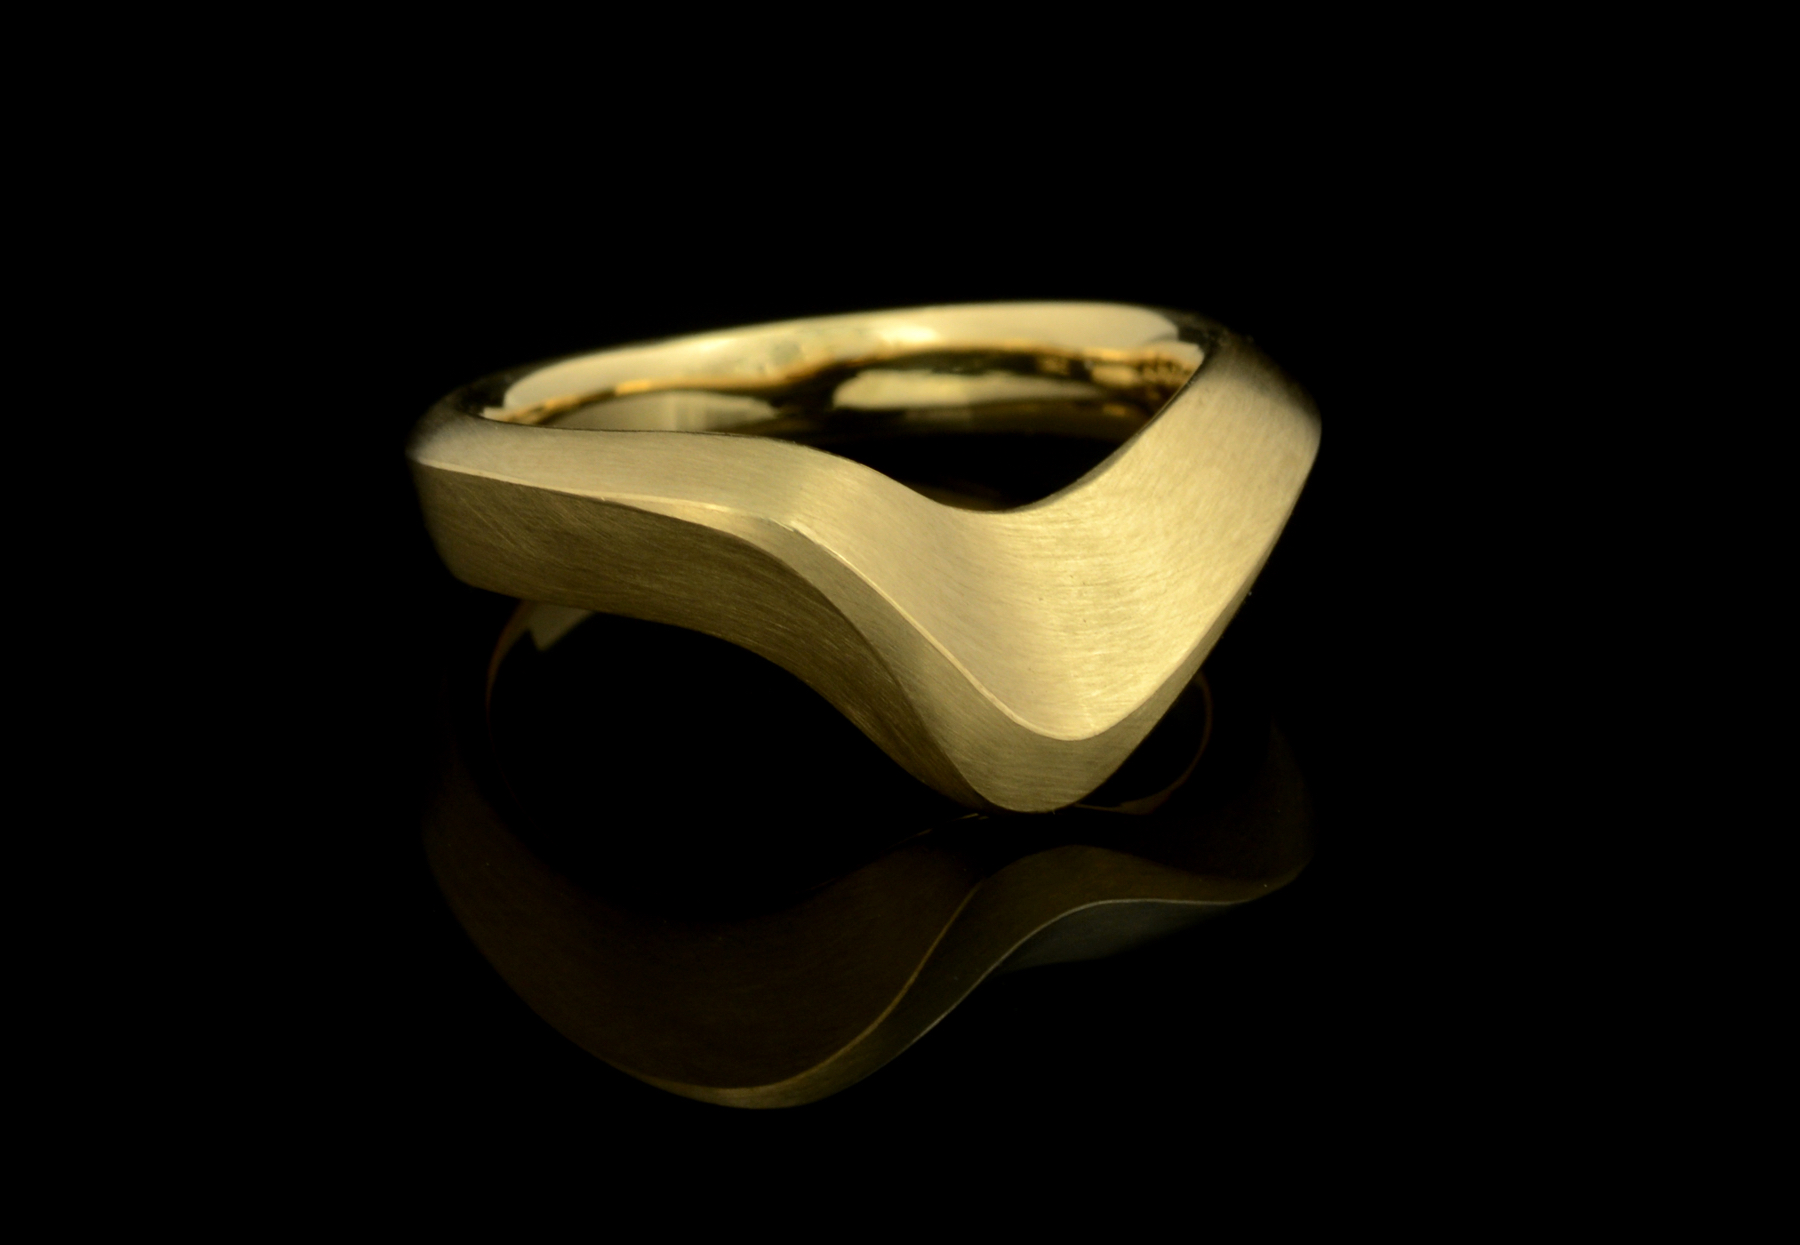 Arris carved wedding band 18-carat yellow gold